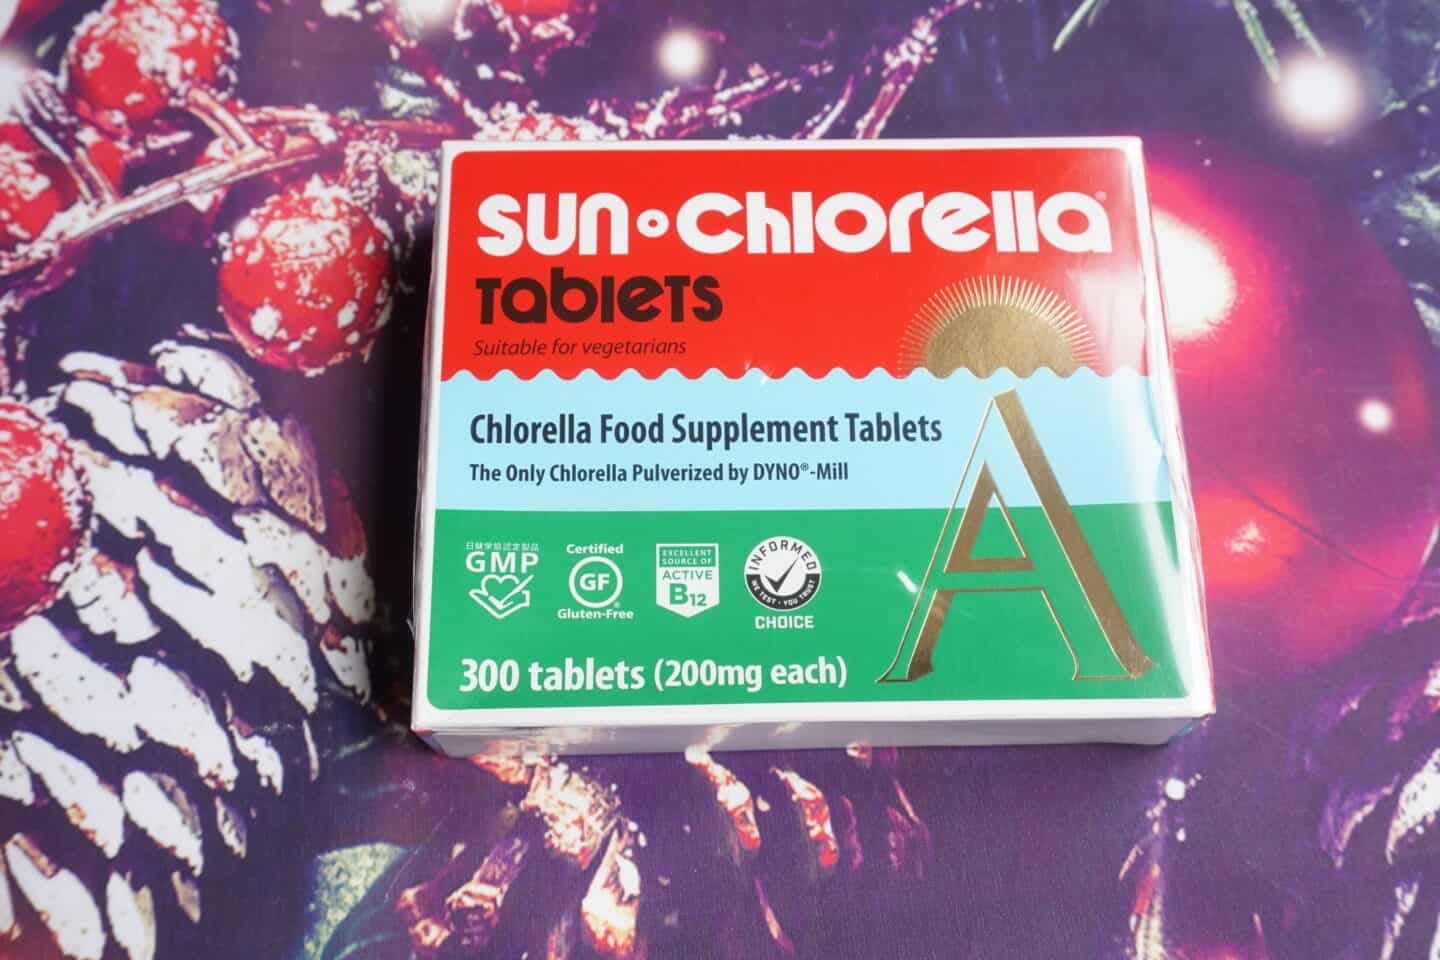 Gifts for runners: Sun chorella food supplement tablets